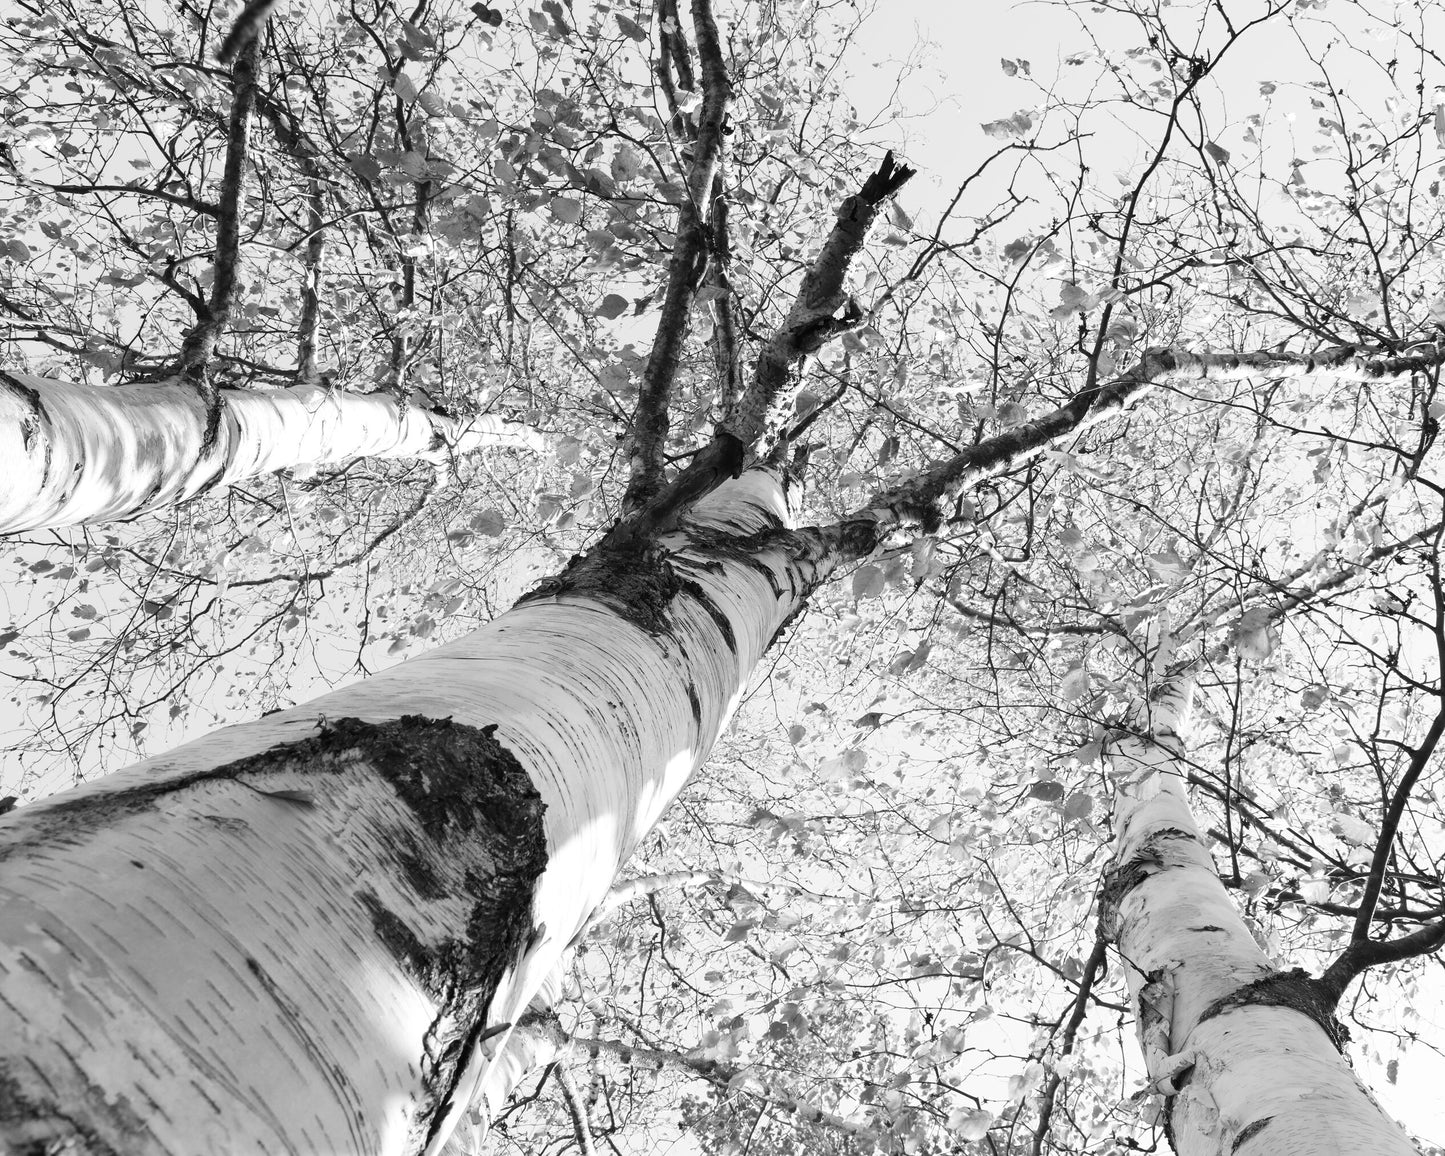 Birch Trees art photo print, black and white tree picture, large photography wall decor, paper or canvas 8x10 16x20 20x20 24x36 30x45 40x60